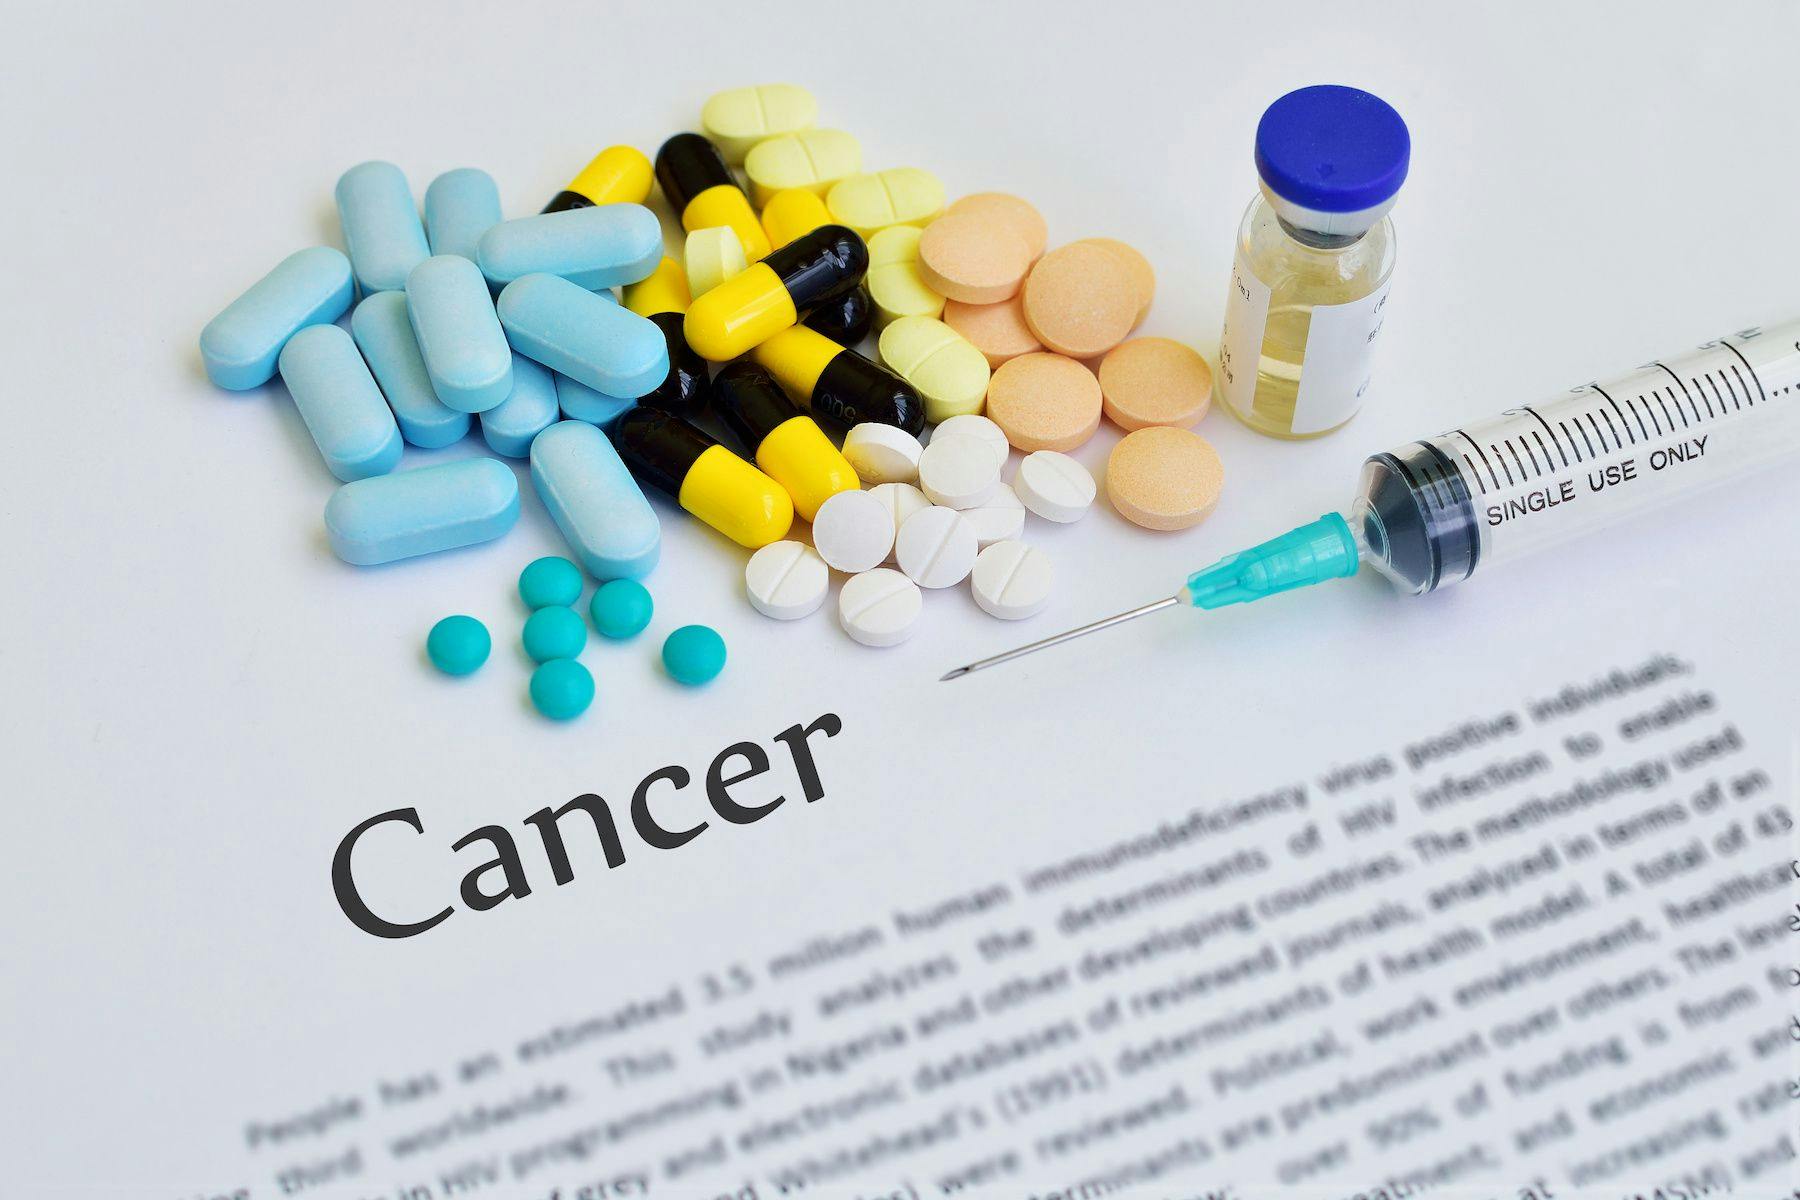 Slideshow: Pharmacists’ Ability to Improve Patient Care in Cancer Medication Management Services